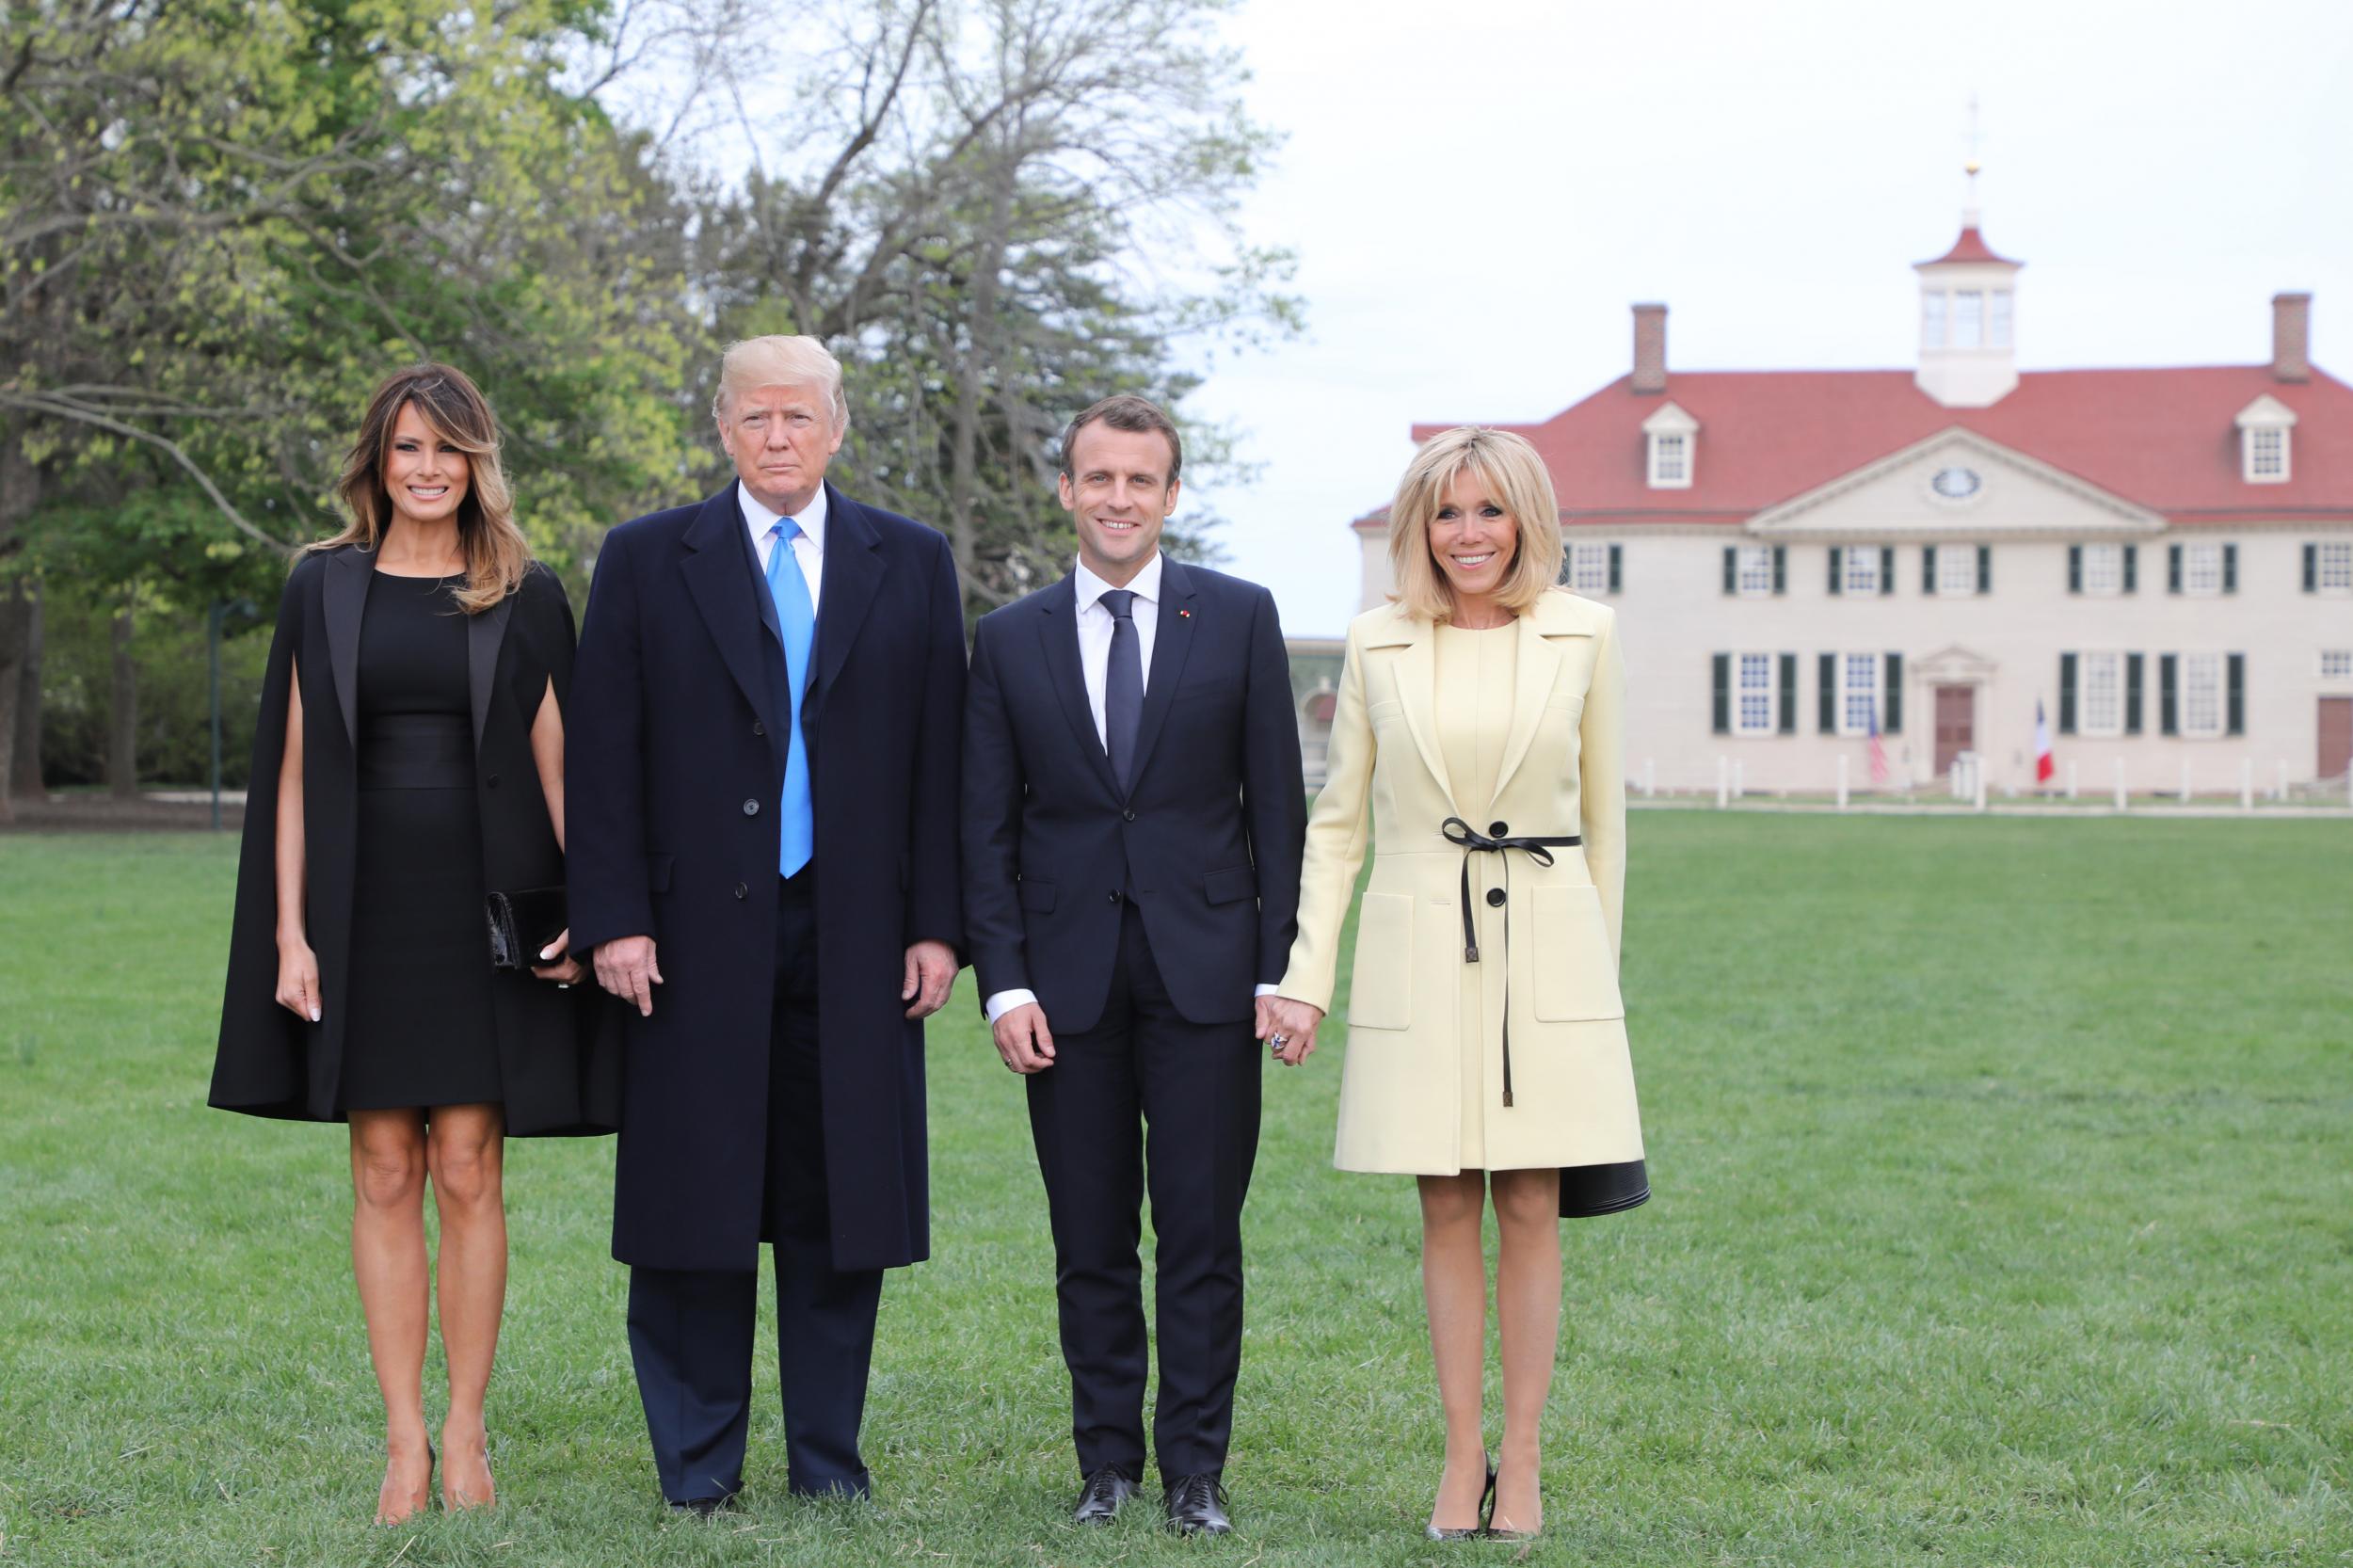 The Trumps and Macrons at George Washington’s ancestral home Mount Vernon in Virginia on 23 April 2018